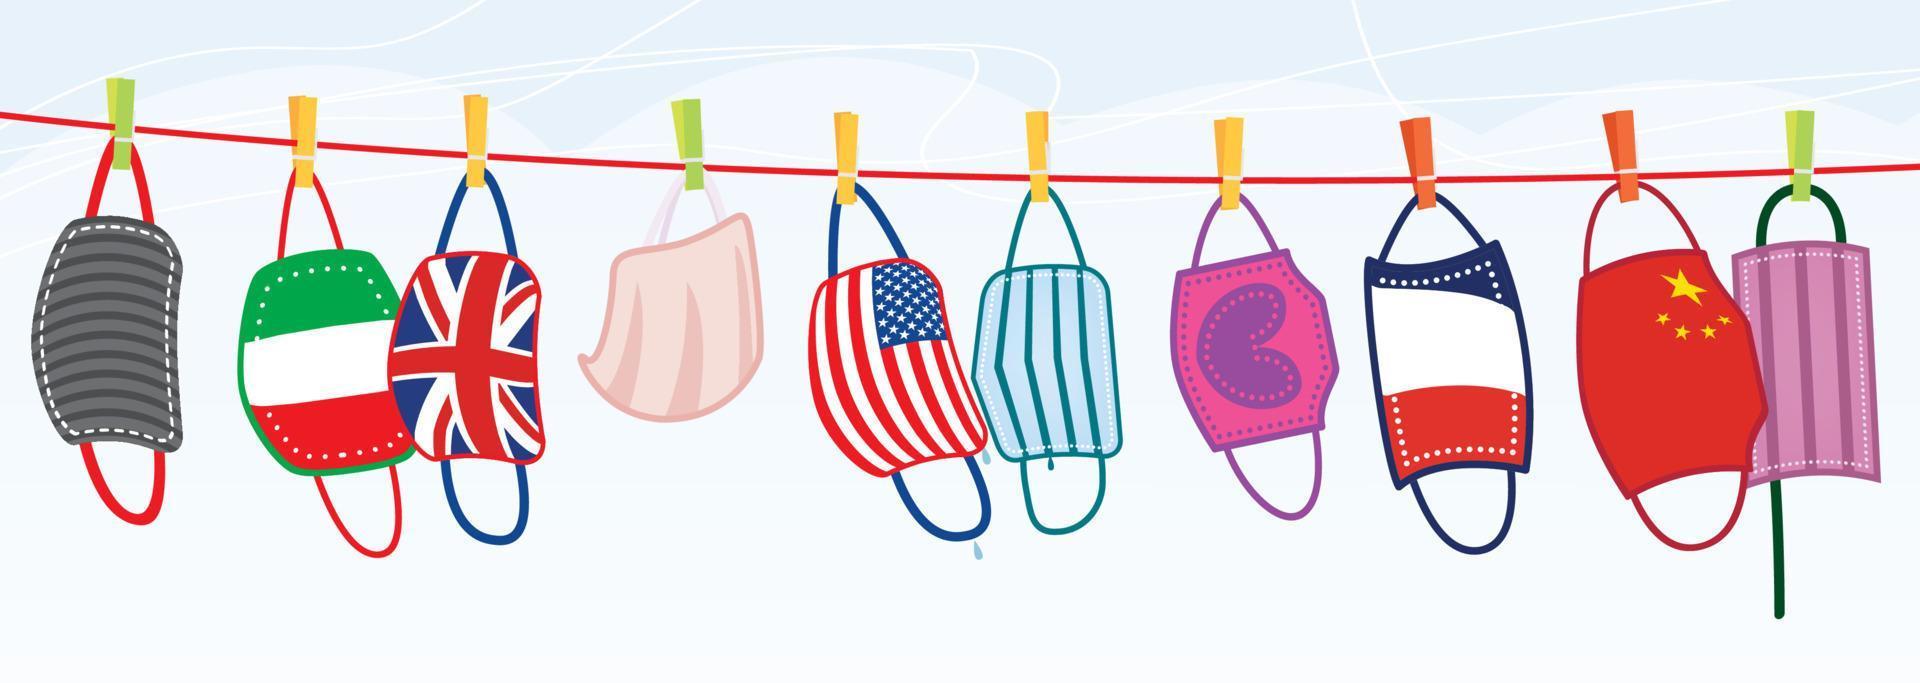 Washed Protective Face Masks Hanging on a Line. Drying Laundered Reusable Masks with Flags of Different Countries. vector